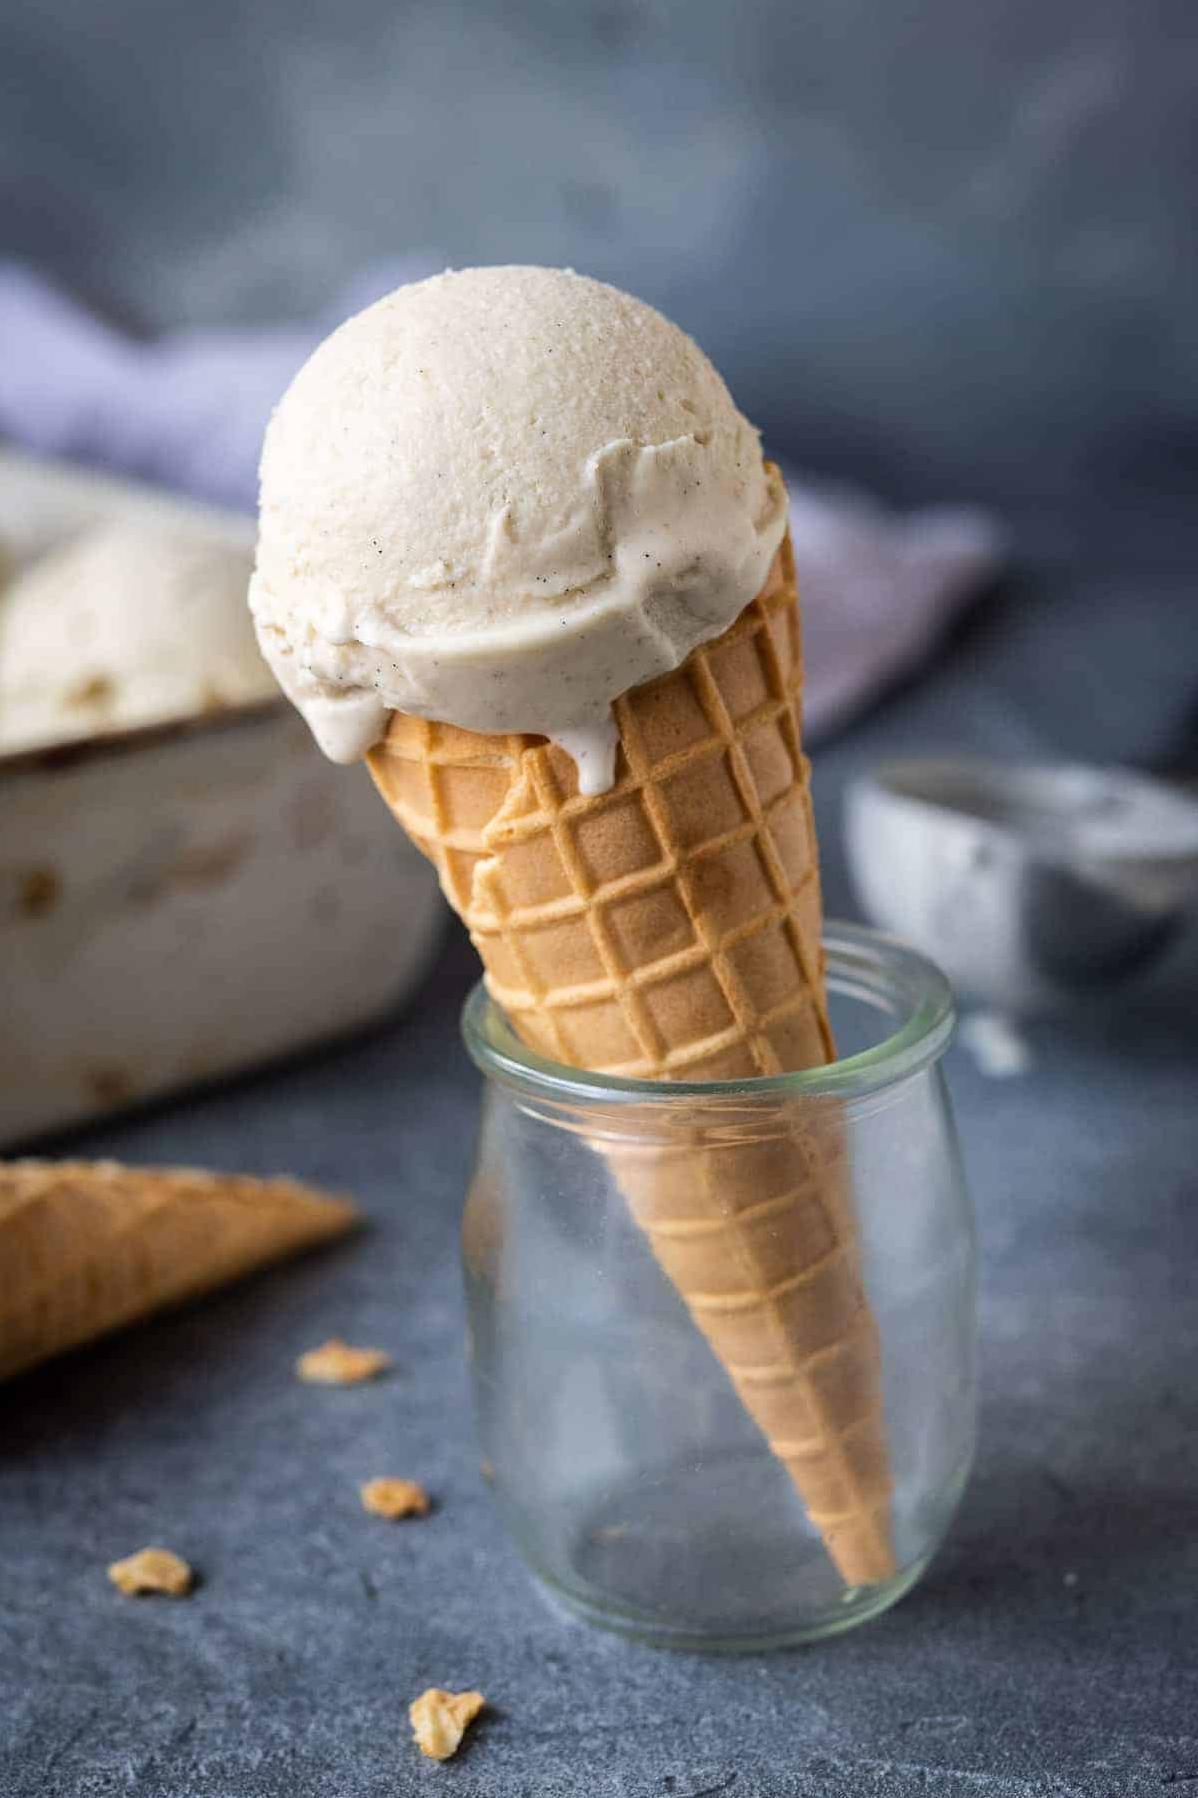  Who needs dairy when you can have vegan vanilla ice cream this good?